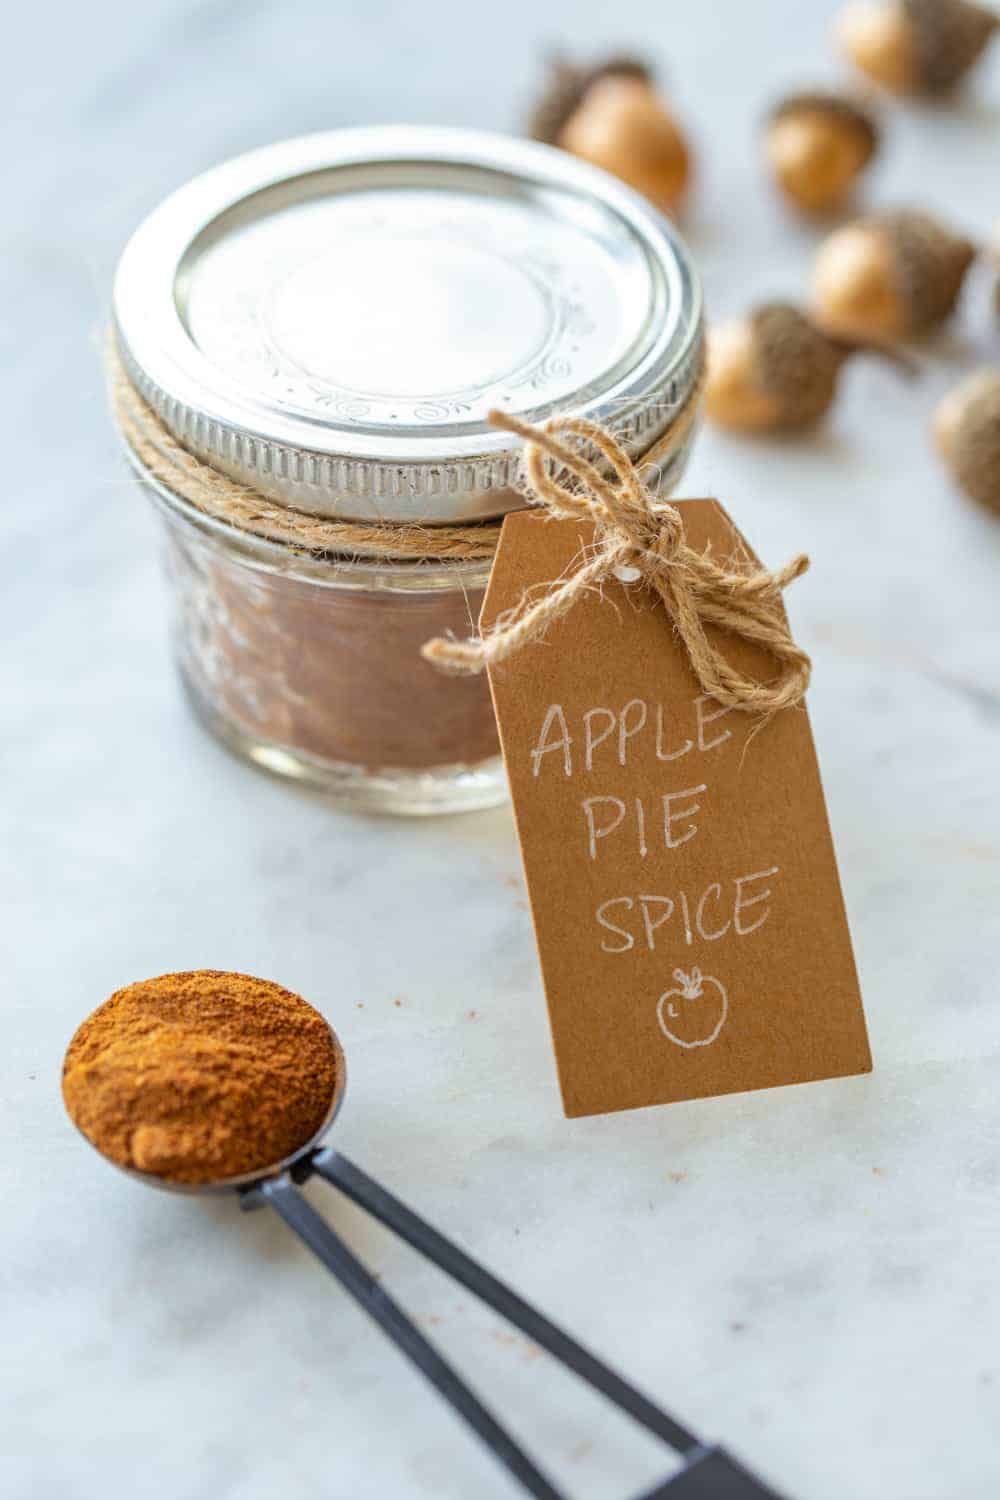 Jar of apple pie spice with a fall gift tag next to a measuring spoon of the spice blend